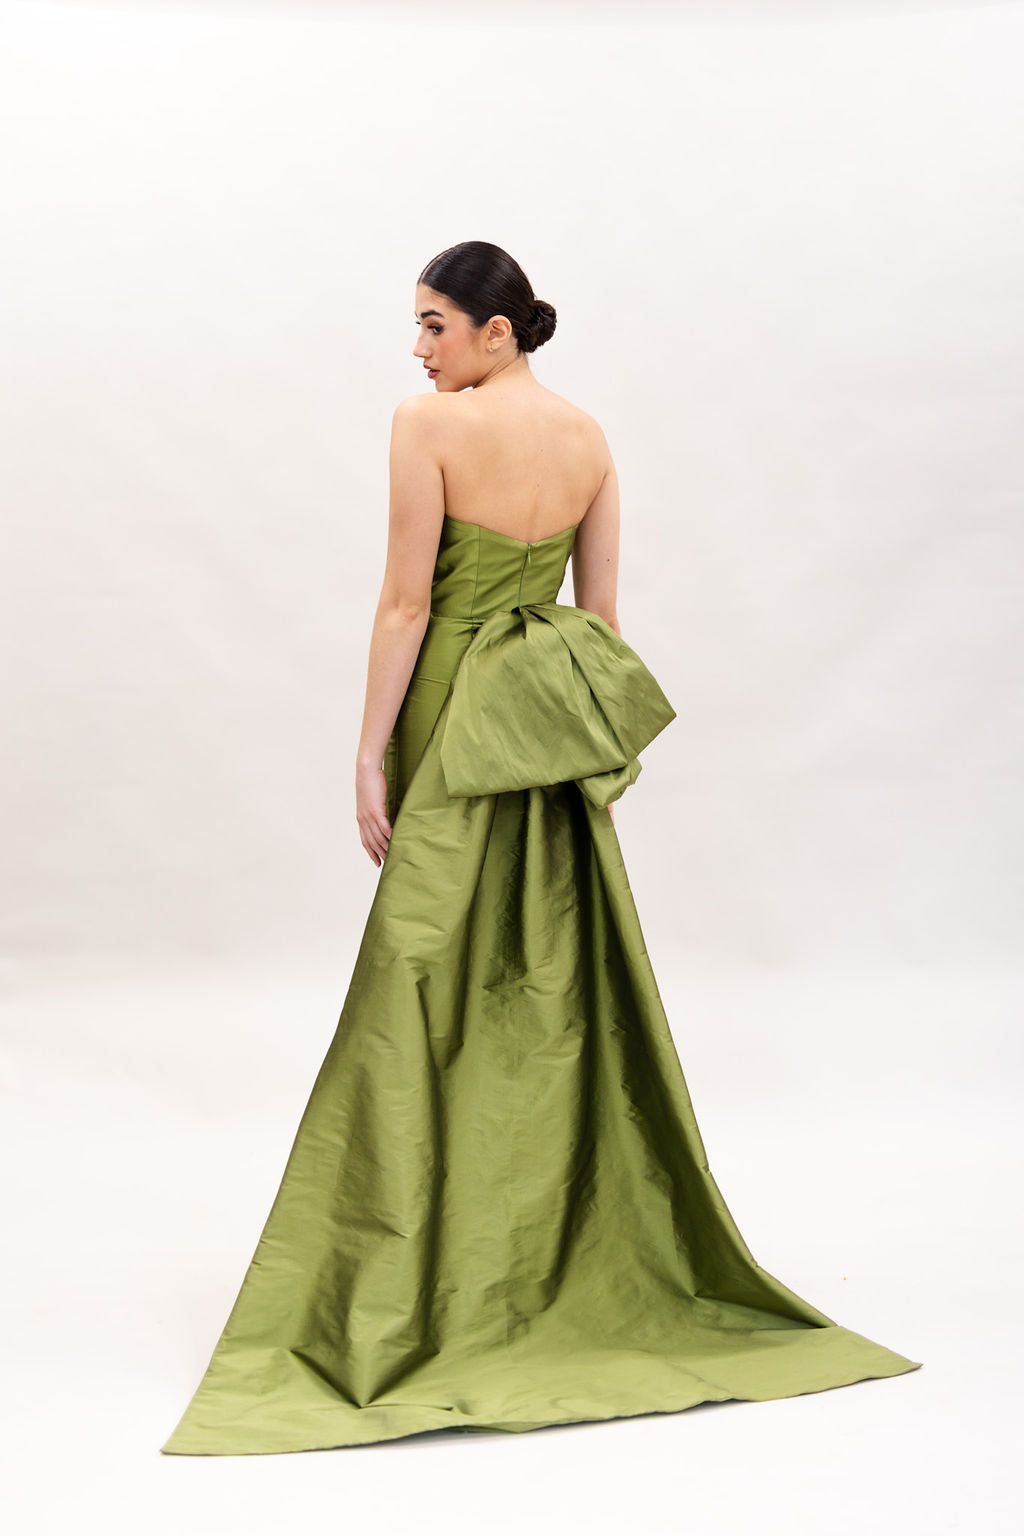 OLIVE TAFFETA AND SEQUIN GOWN